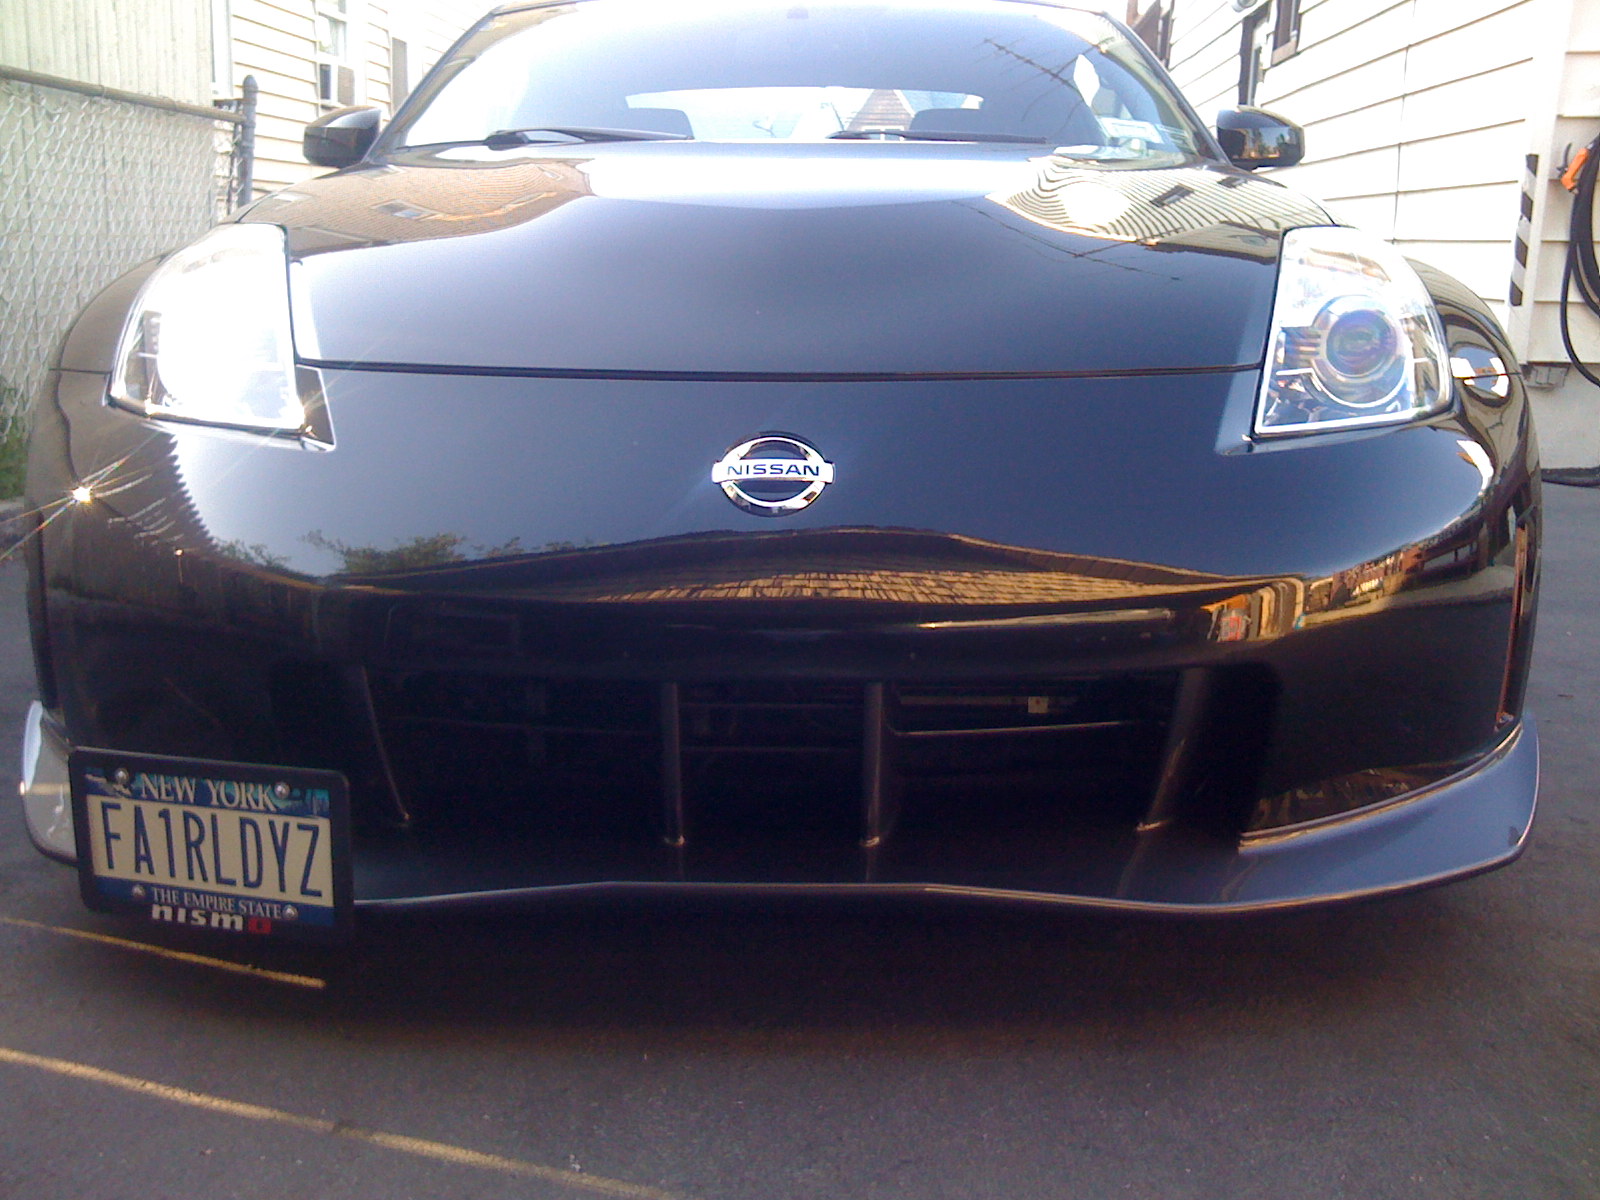 Front License Plate Mount on Nismo -  - Nissan 350Z and 370Z  Forum Discussion